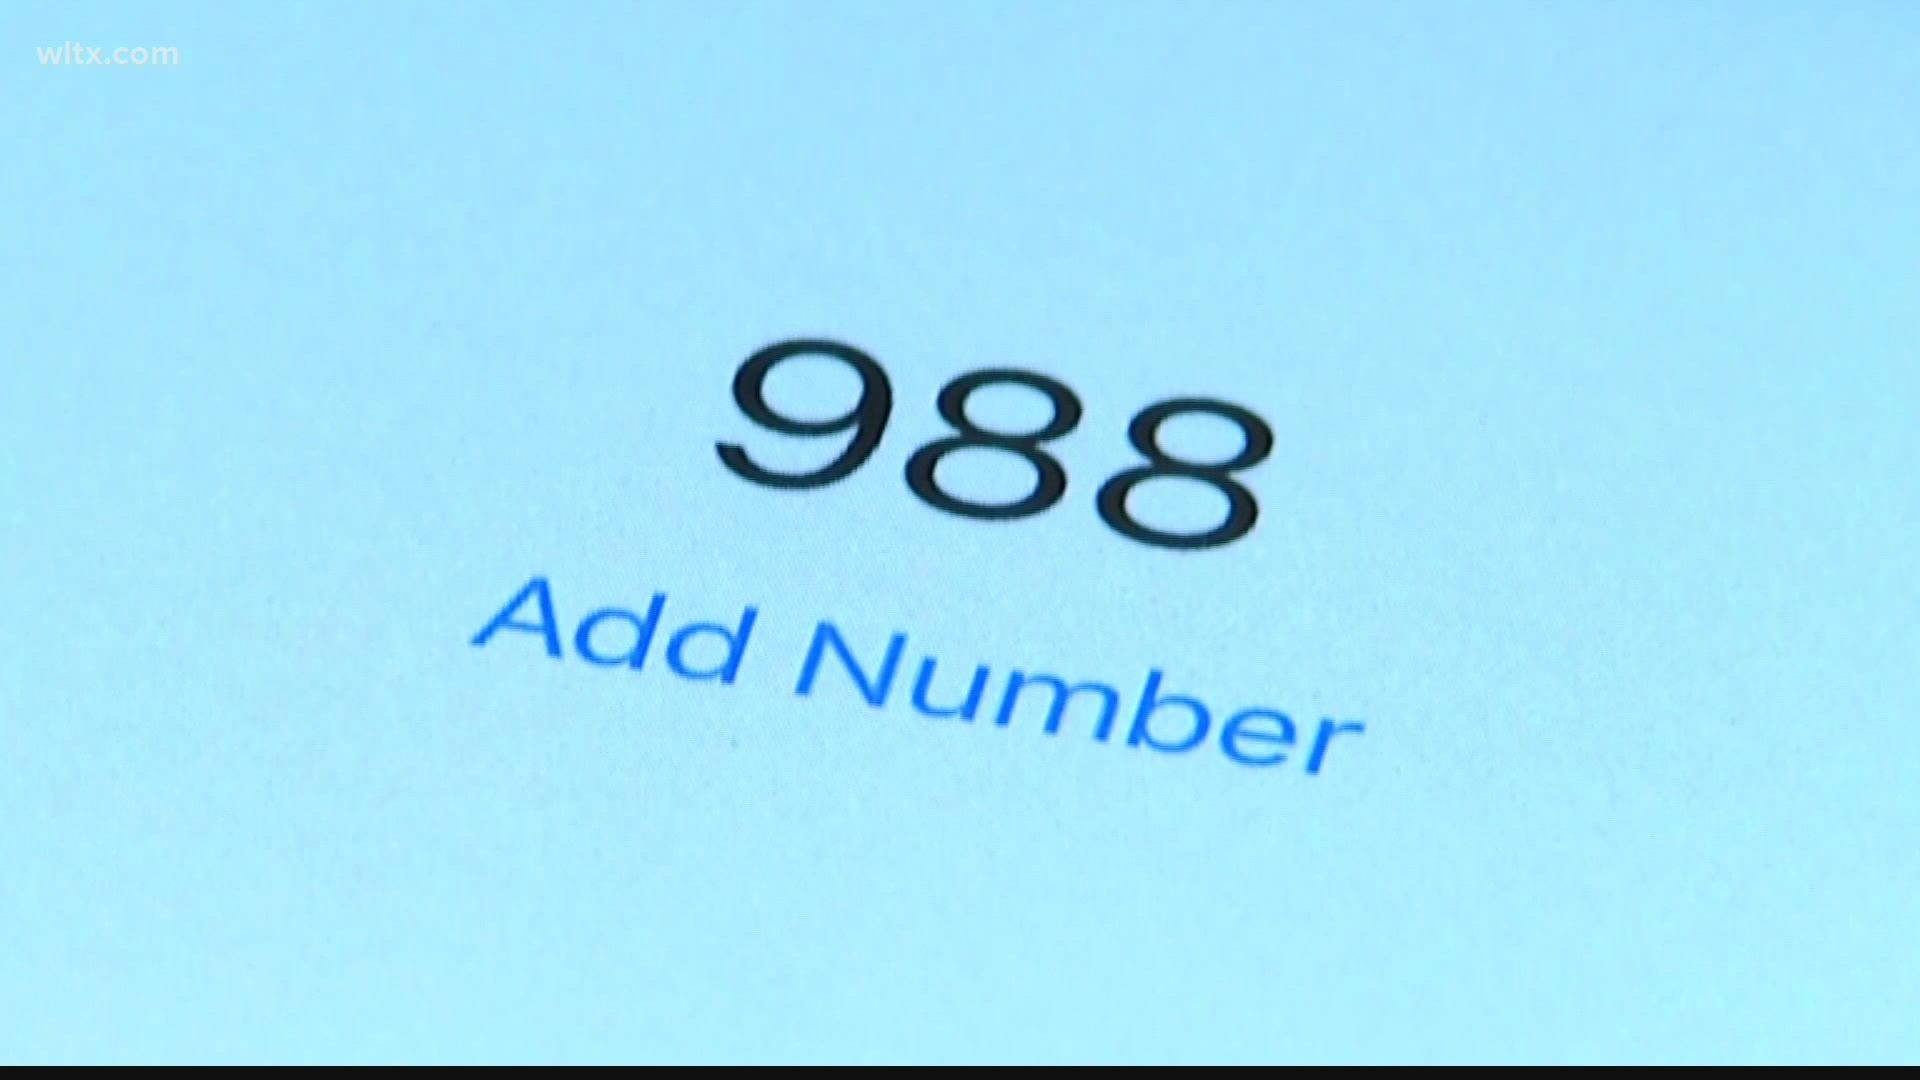 State lawmakers got an update on the needs of the 988 hotline center.